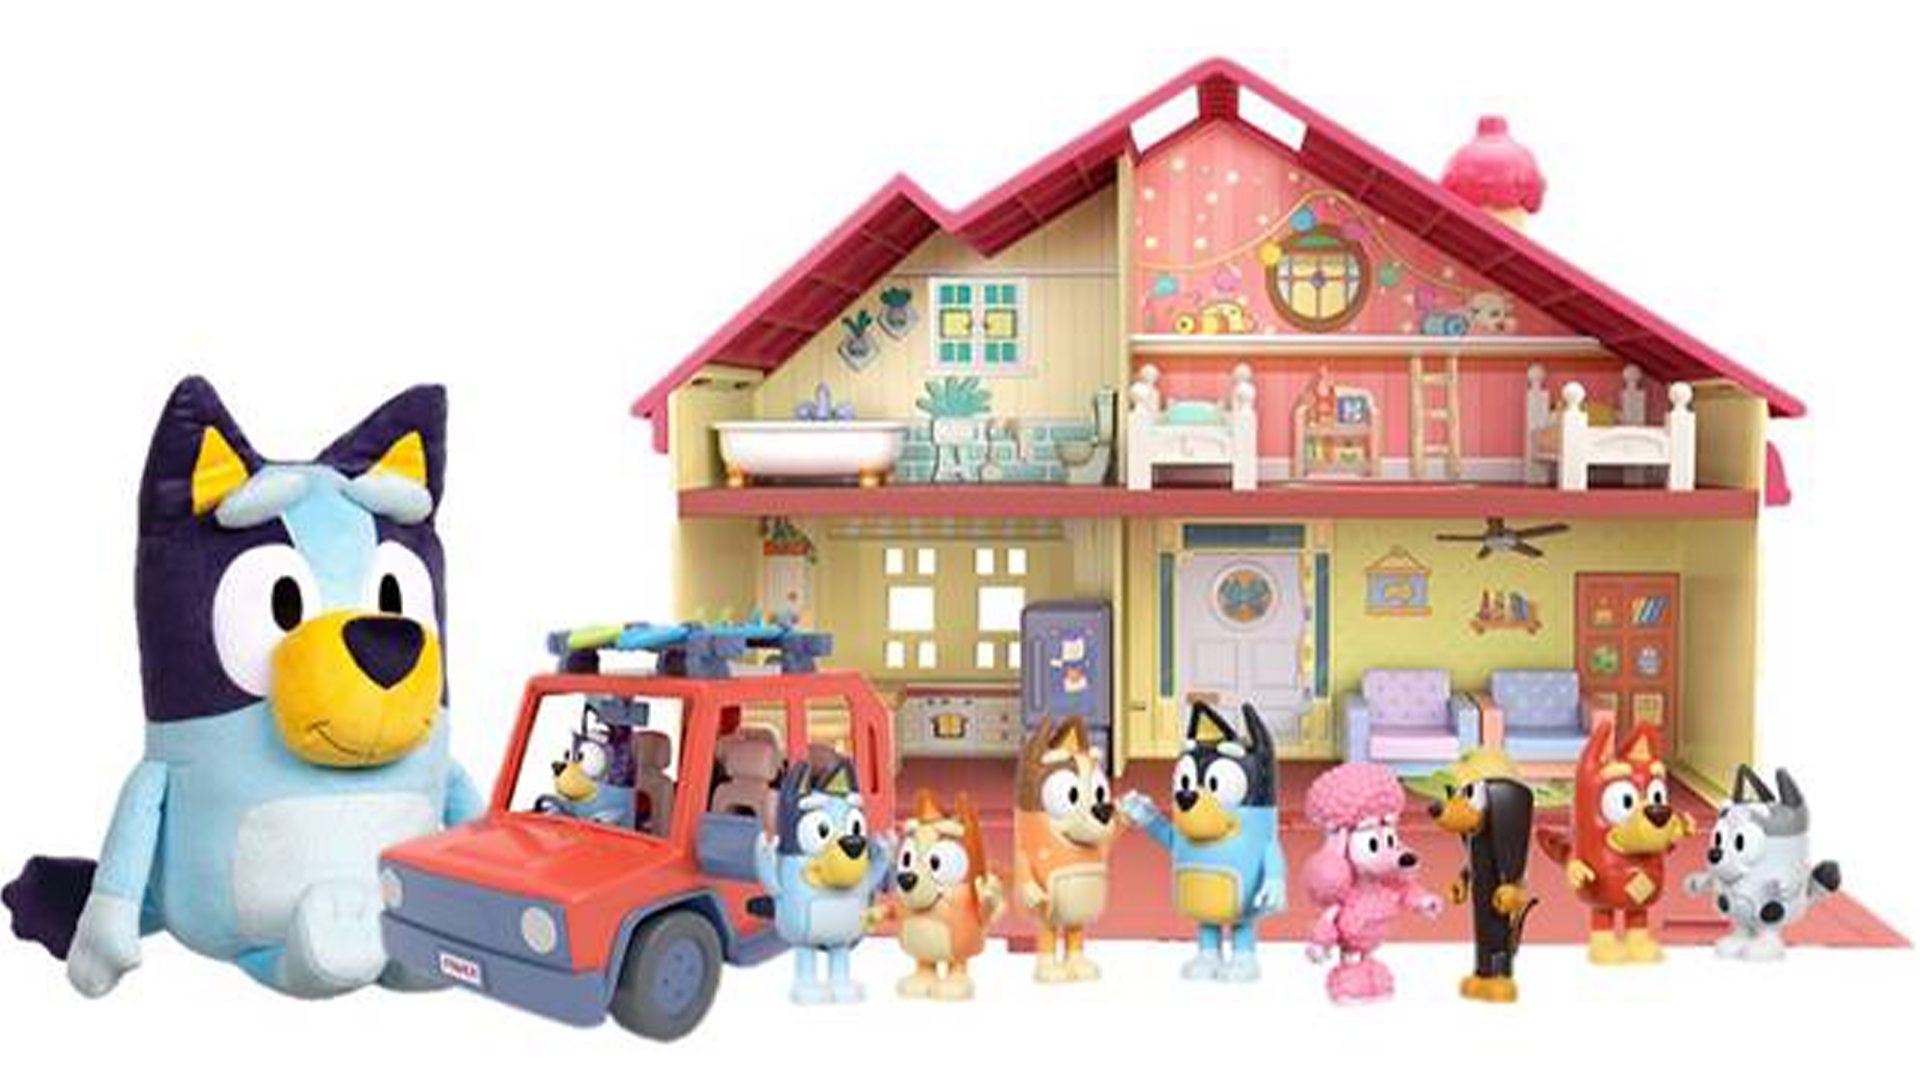 BBC Studios Launches 'Bluey' Official Toys in South Korea for the